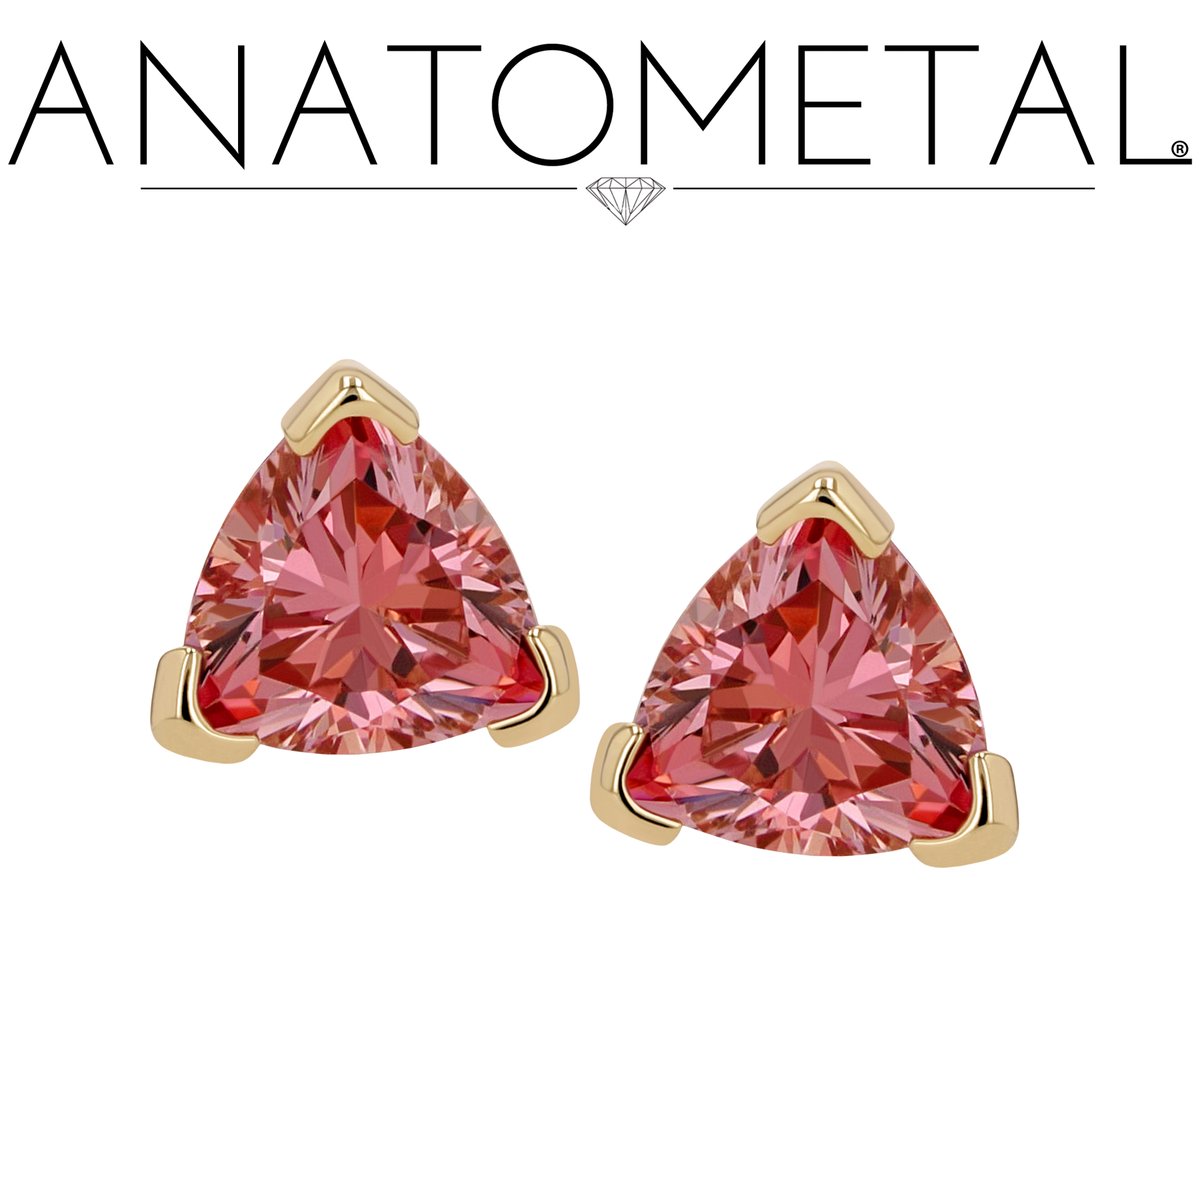 Adorn yourself with our Trillion Ends. Available in 18K yellow, rose, and white gold. Choose from our beautiful array of gemstones to compliment your unique style. ✨ #Anatometal #Trillionends #18Kgold #Bodyjewelry #Safepiercings